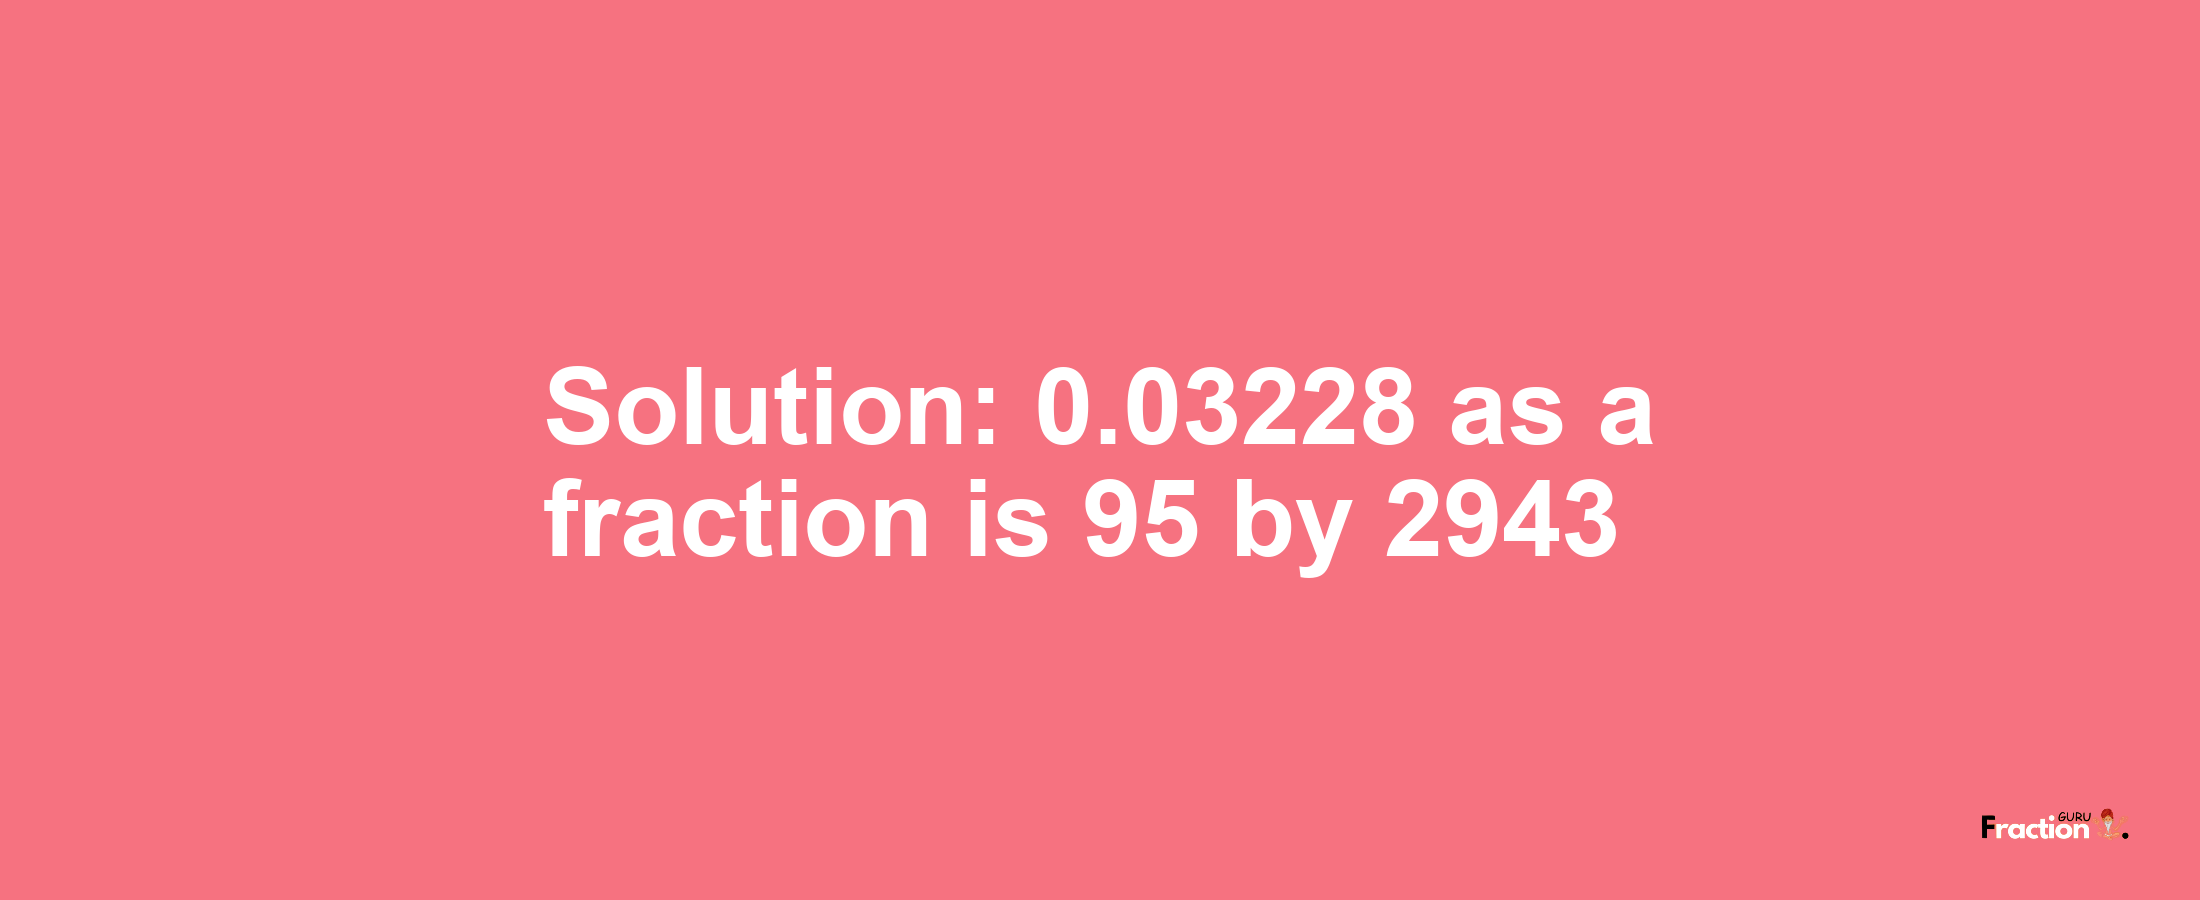 Solution:0.03228 as a fraction is 95/2943